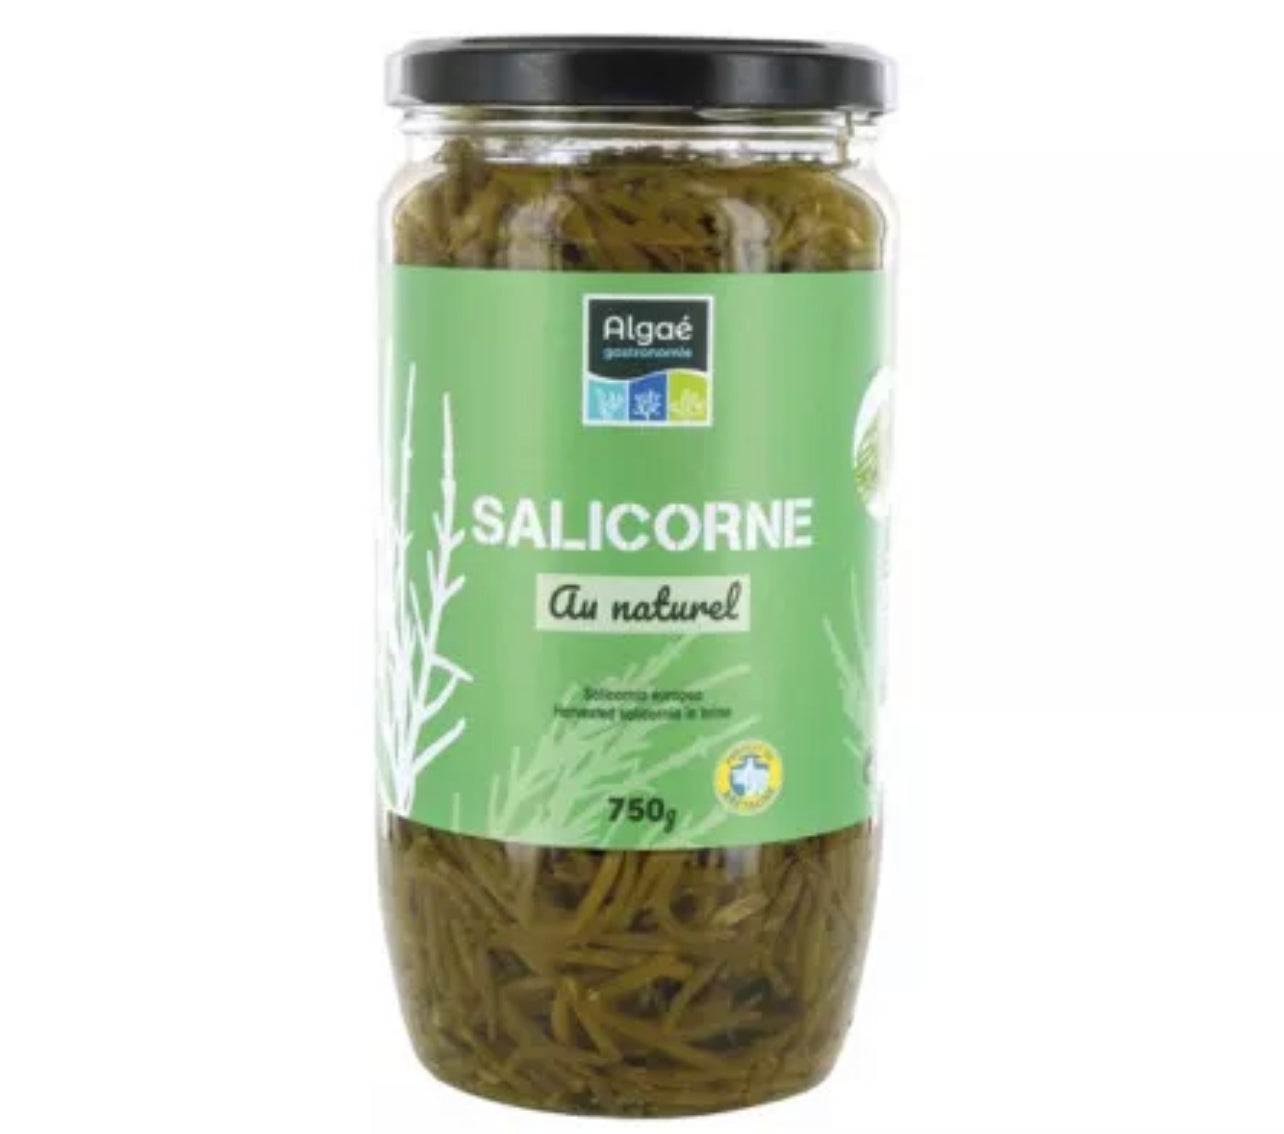 Naturally cultivated French samphire - 750g